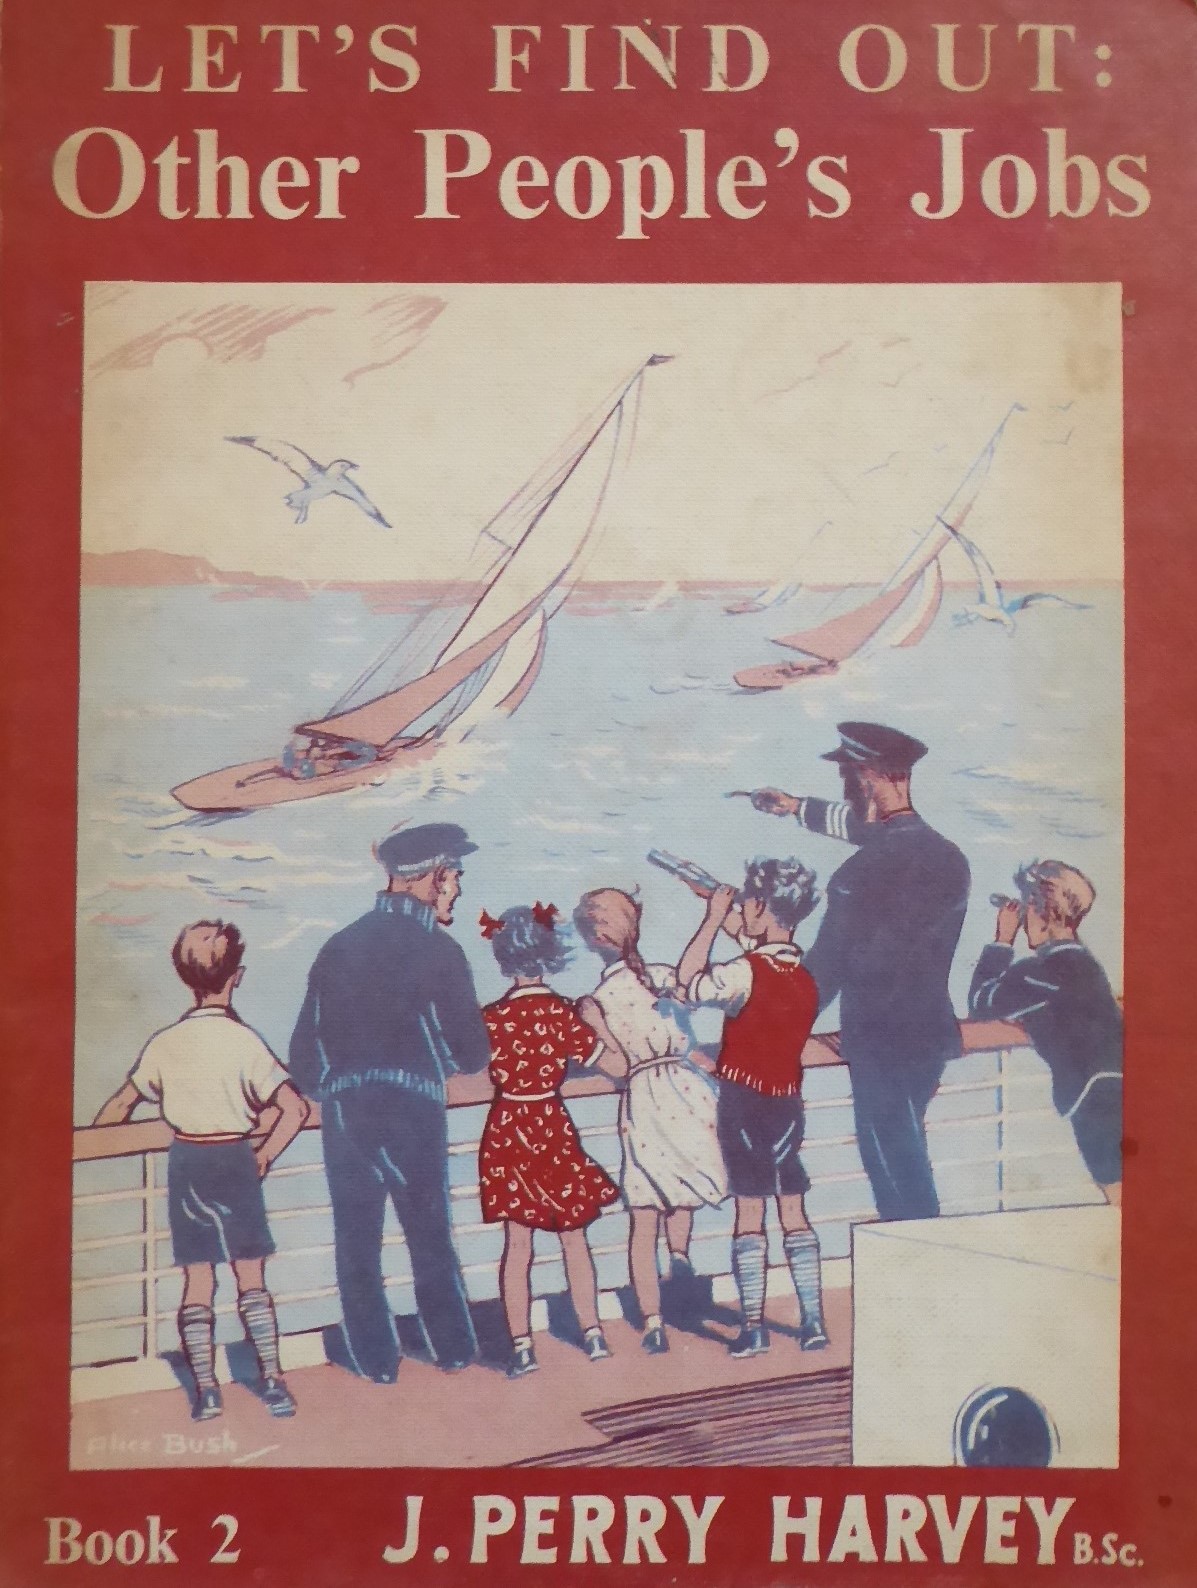 Other People's Jobs by J. Perry Harvey (Evans Brothers - Let's Find Out series) (image)